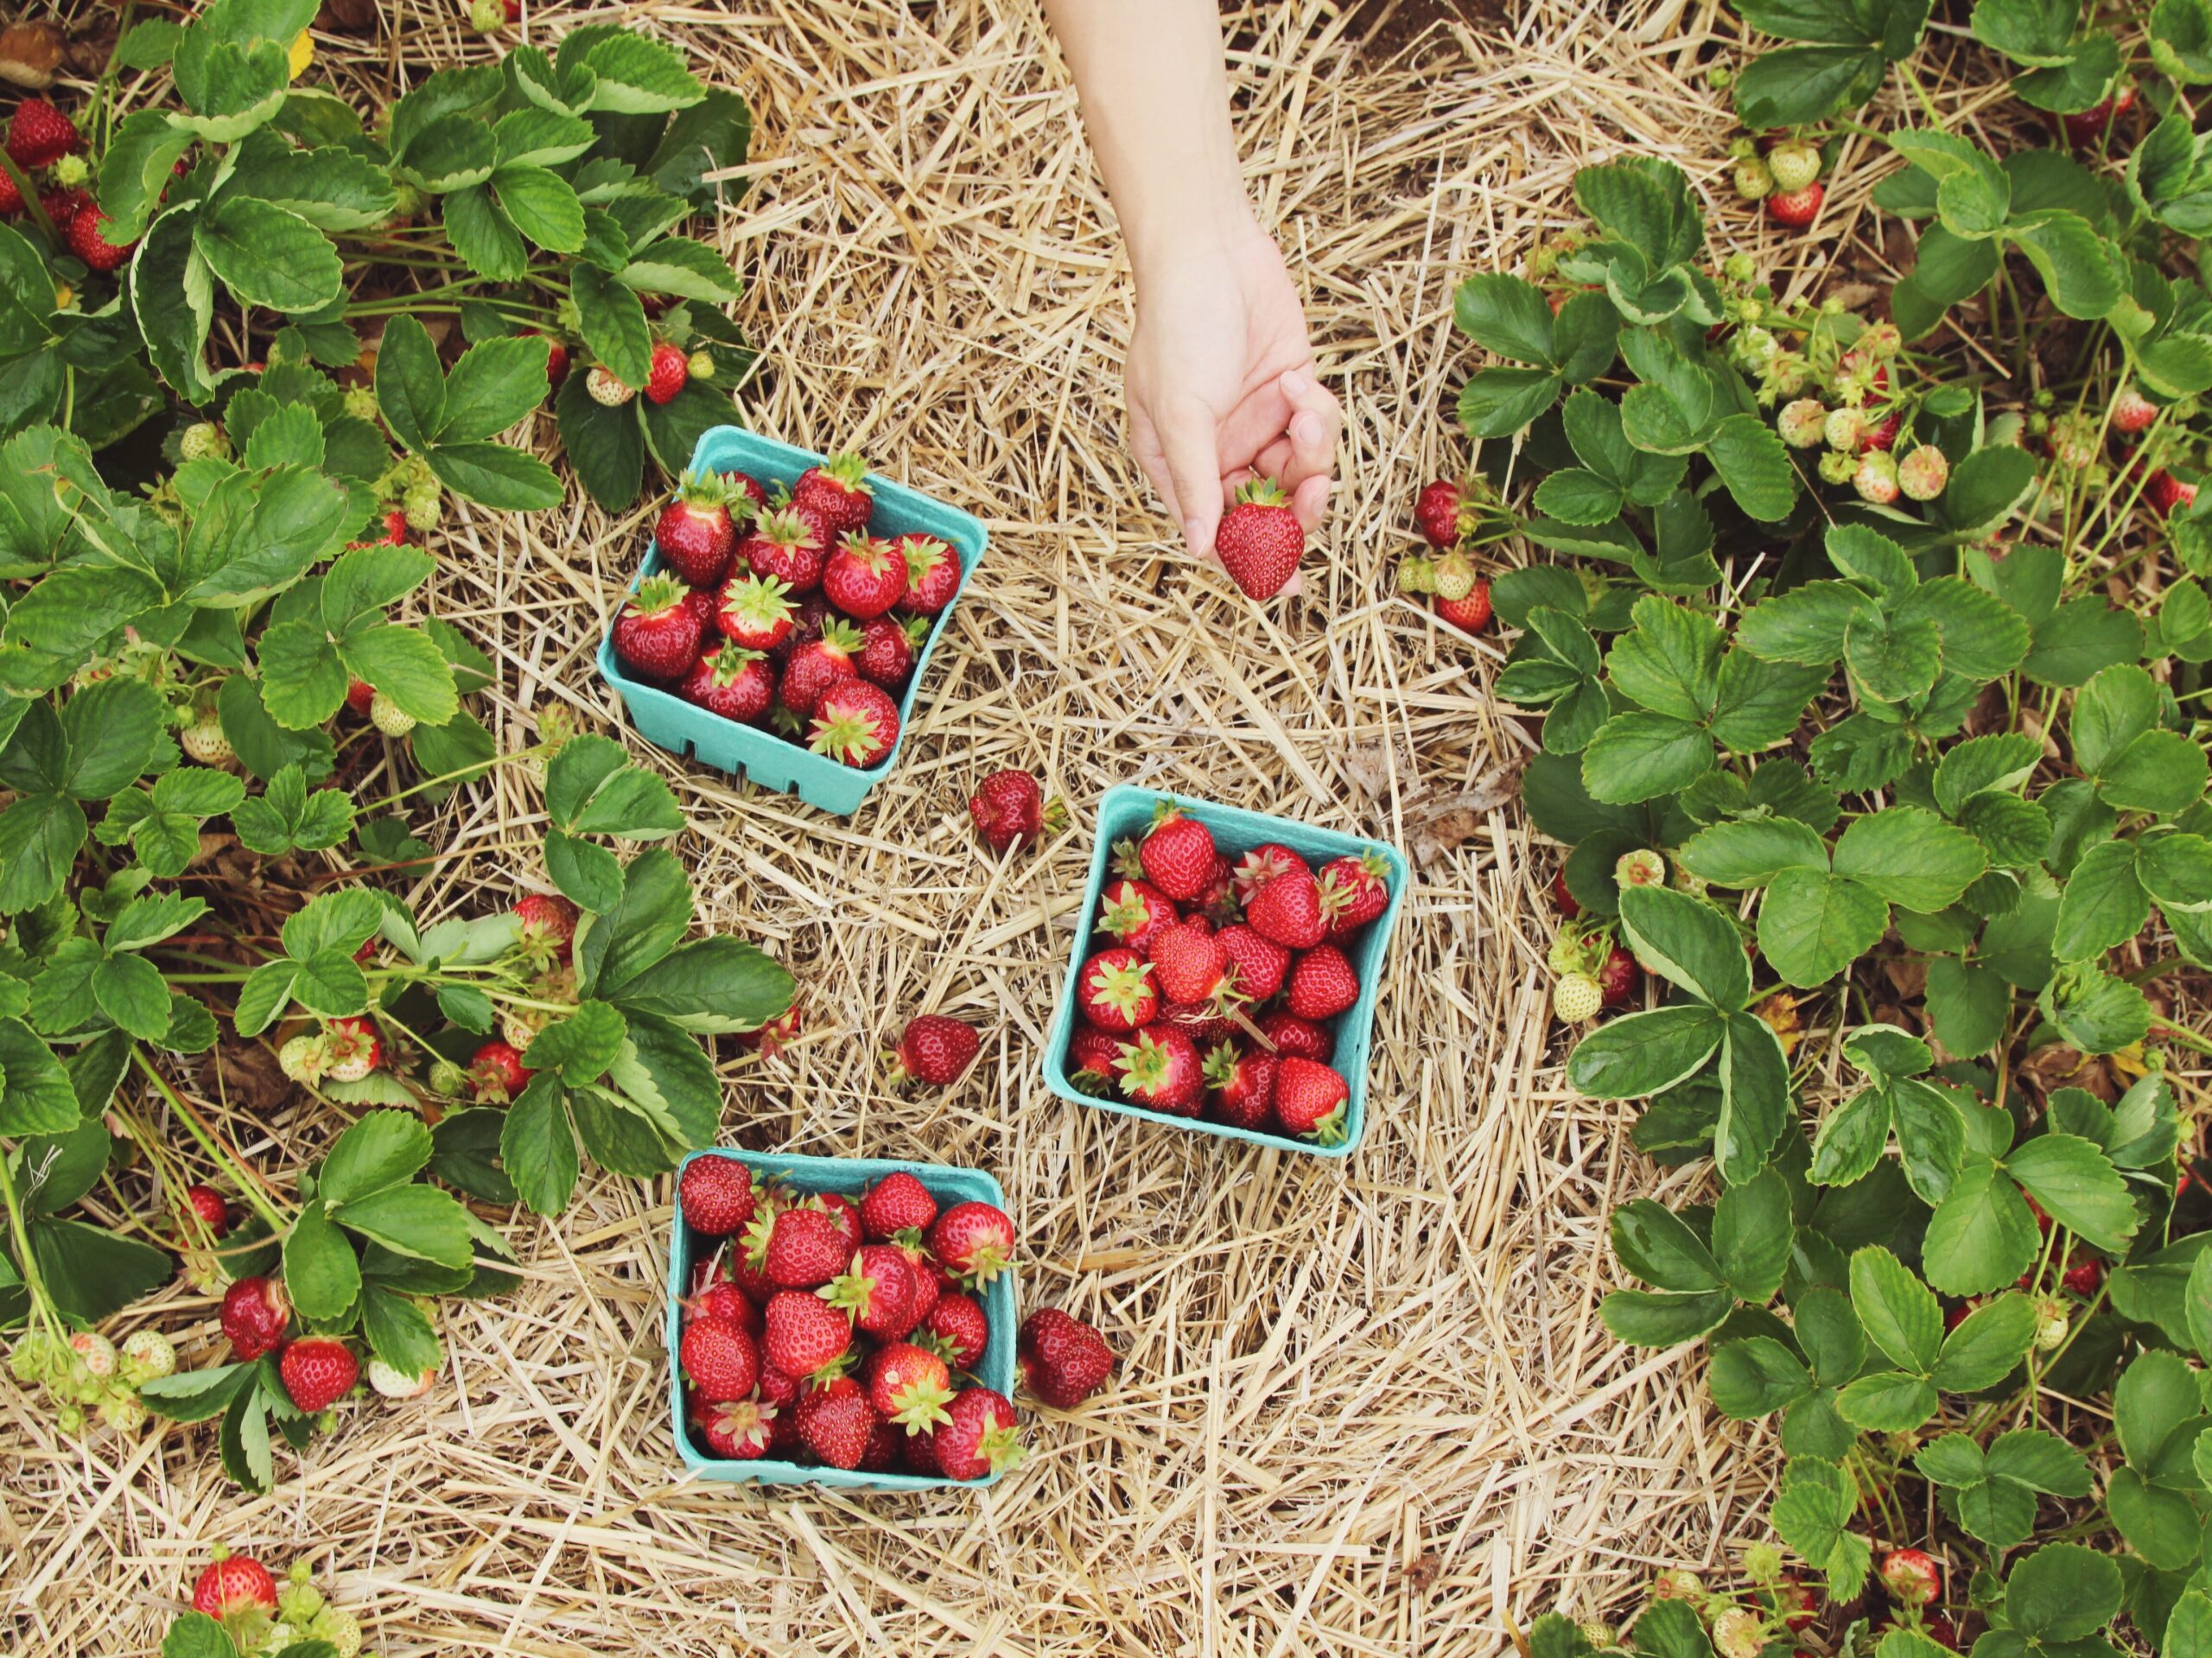 3 baskets of strawberries laying in field